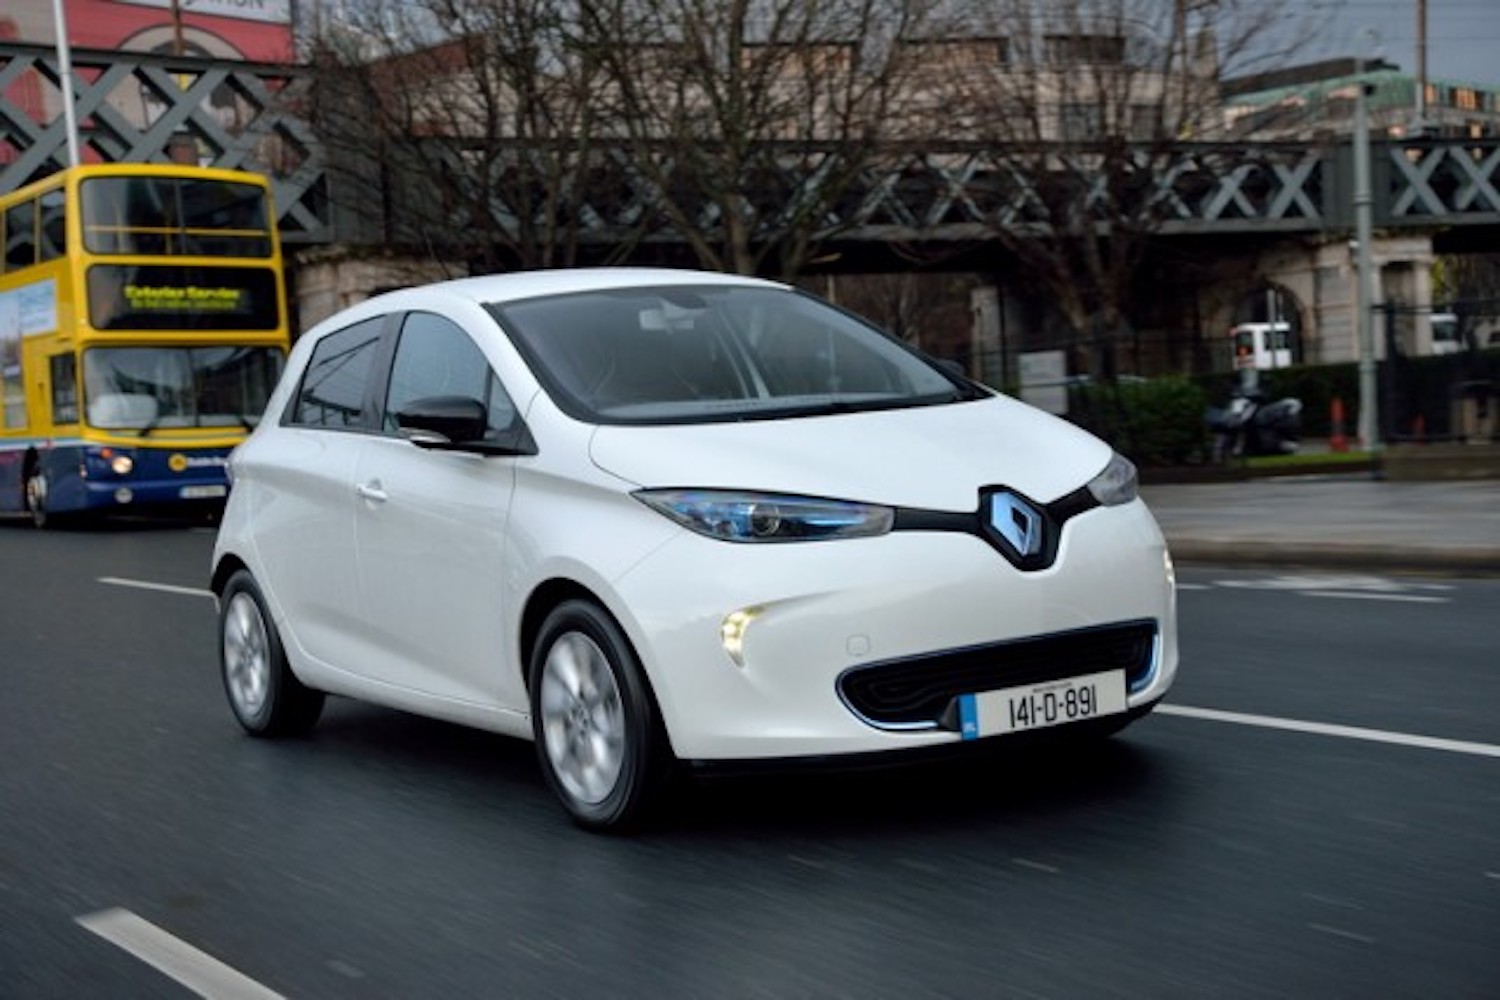 Buying a second-hand electric car